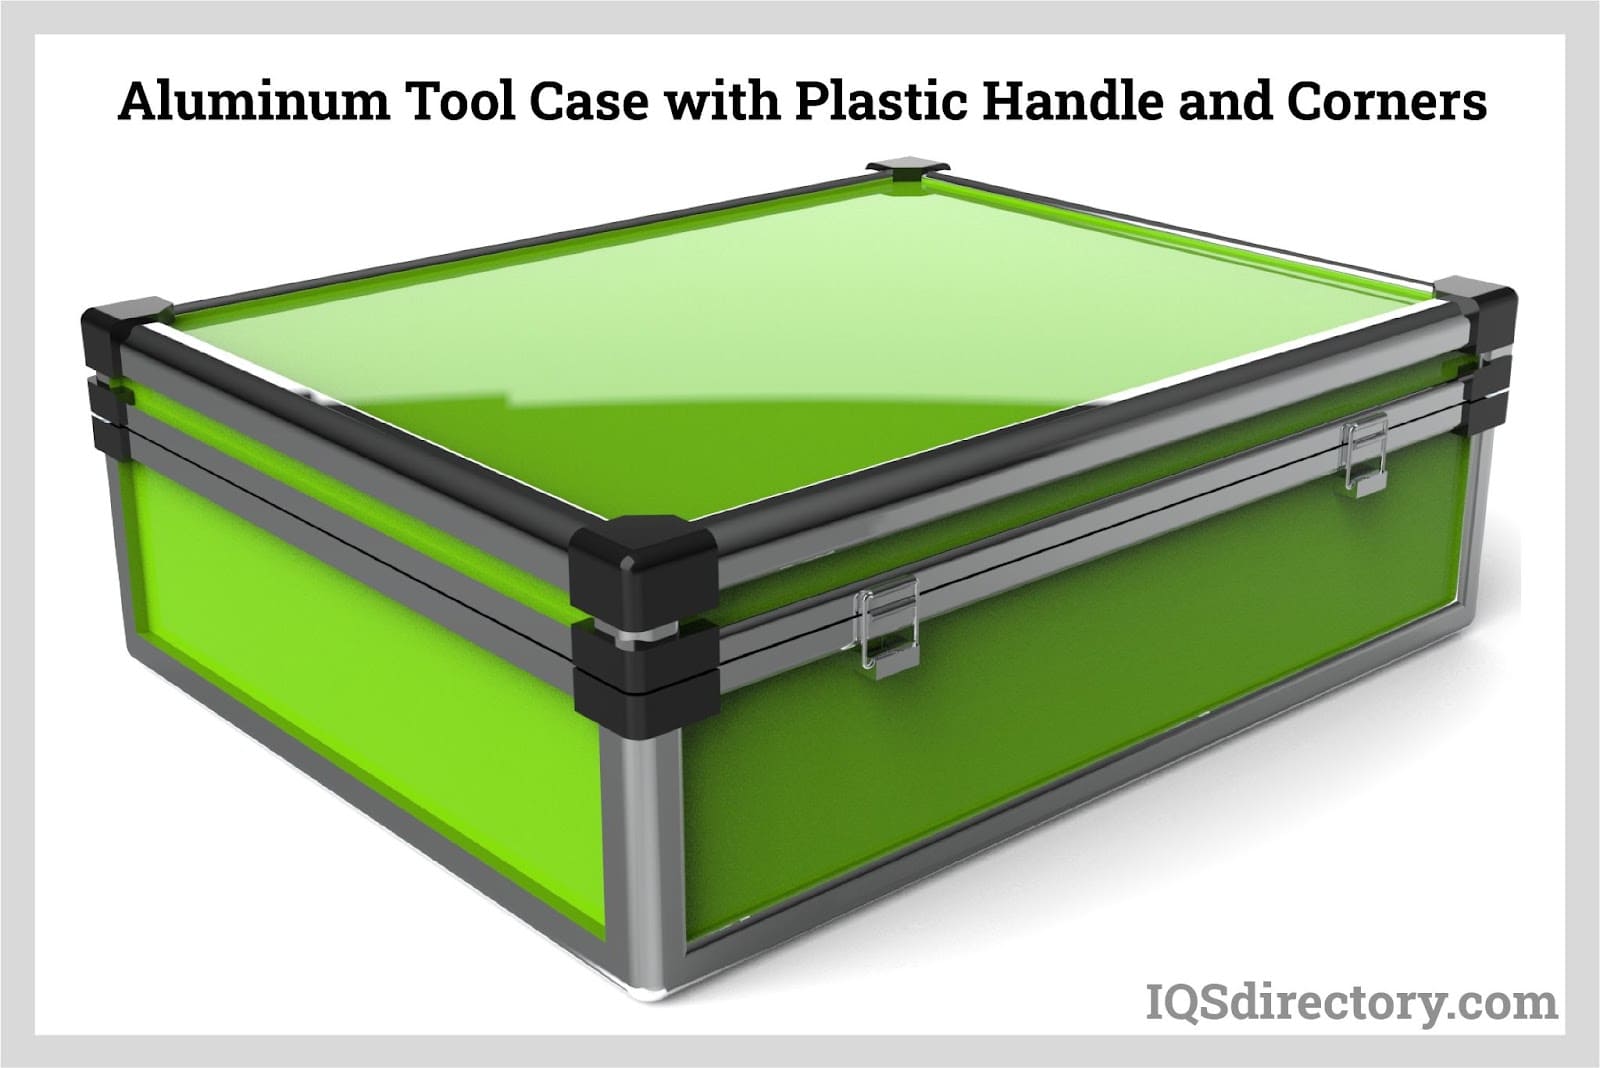 Aluminum Tool Case with Plastic Handle and Corners